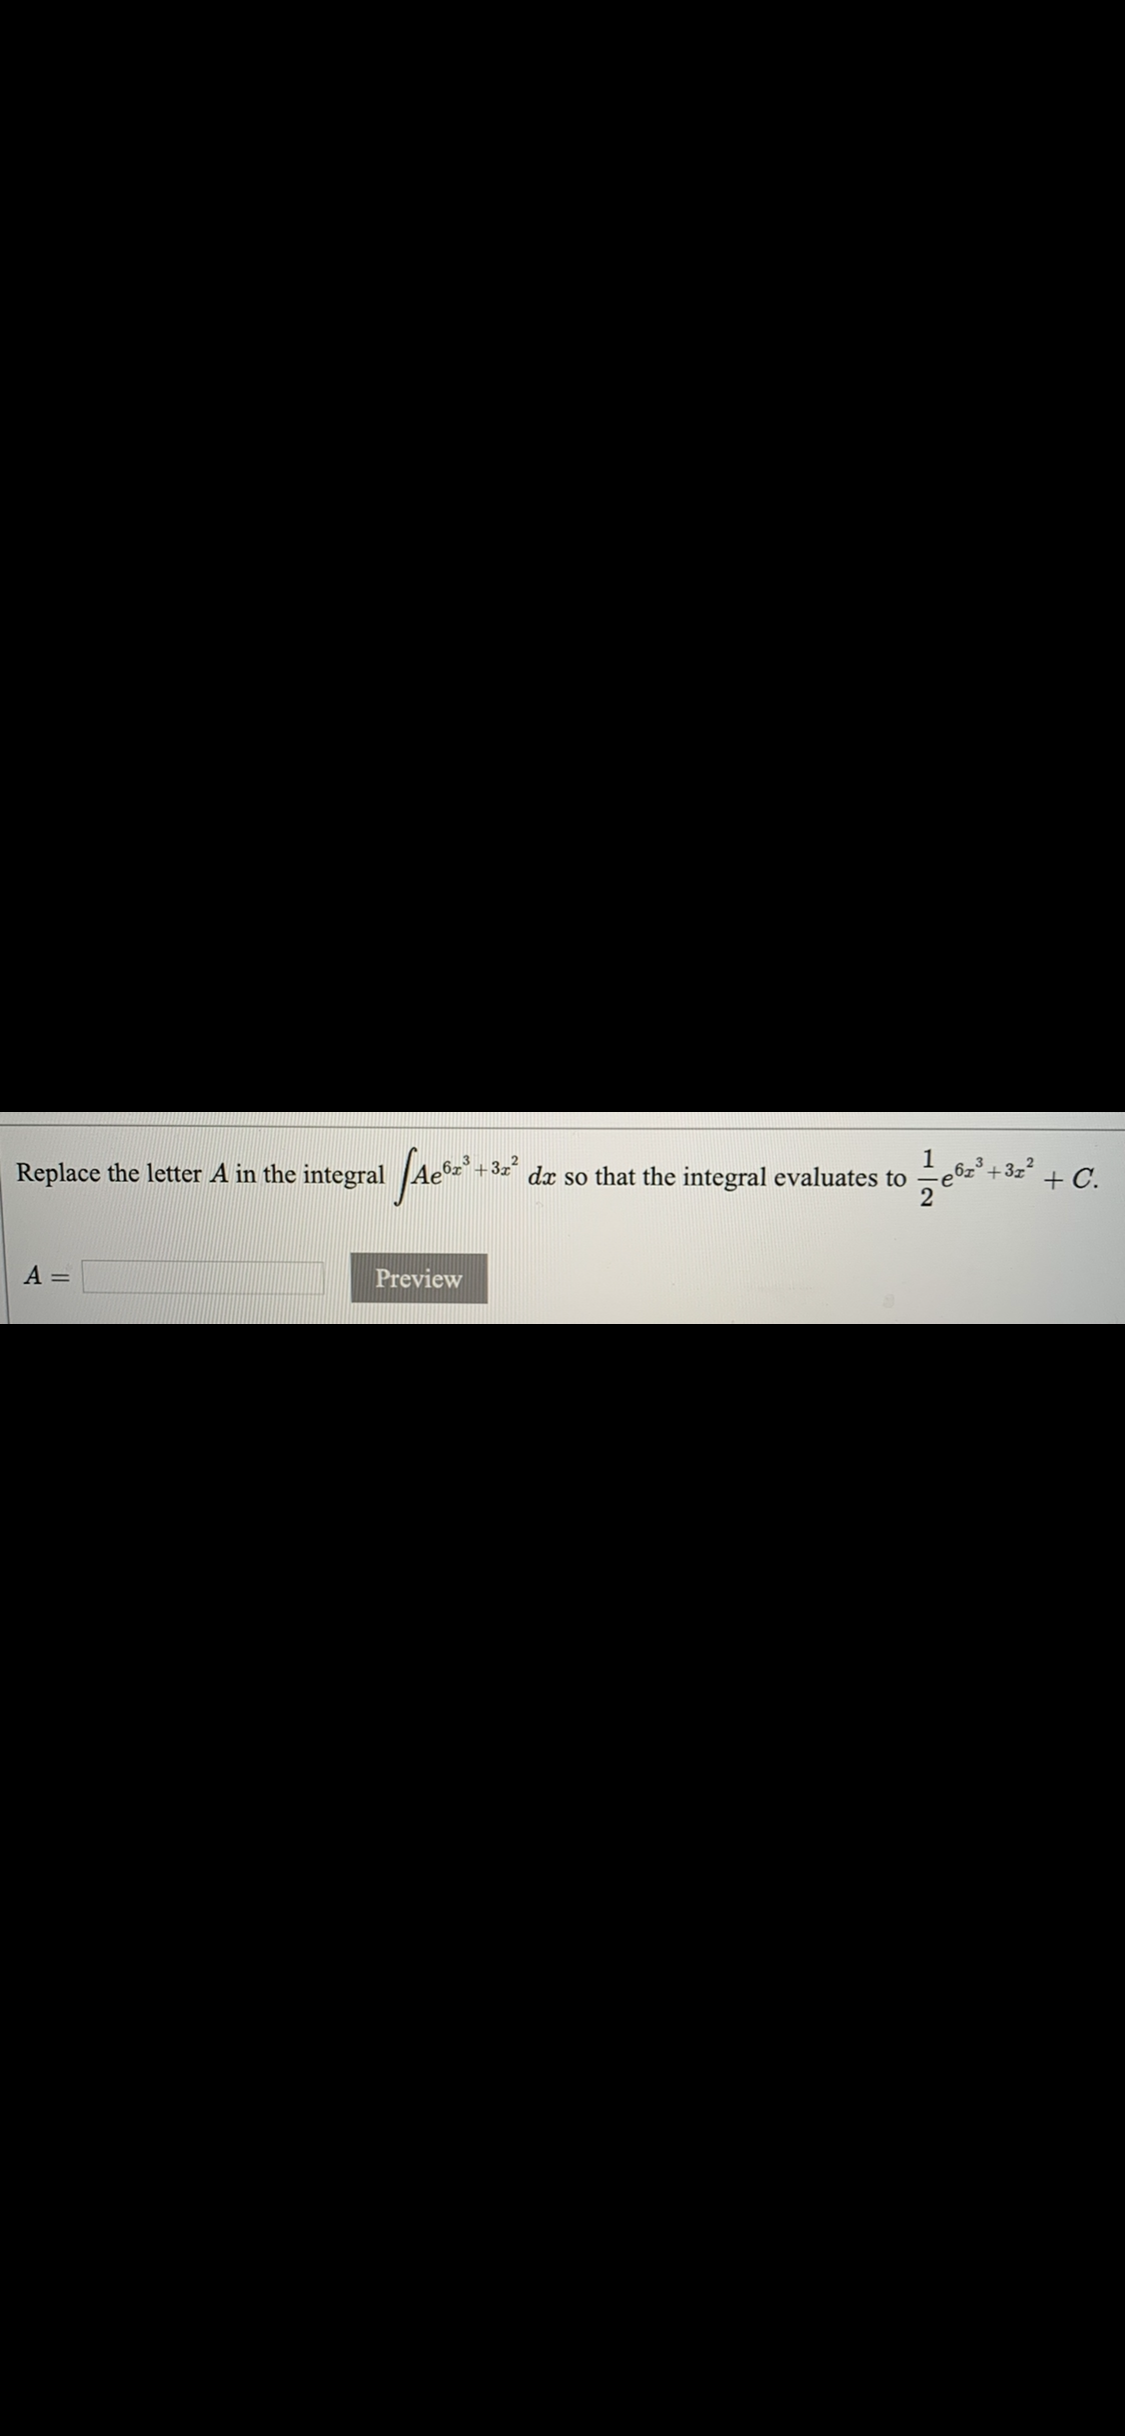 Replace the letter A in the integral Aeºz* +
1
dx so that the integral evaluates to
2
+322
+ C.
A =
Preview
